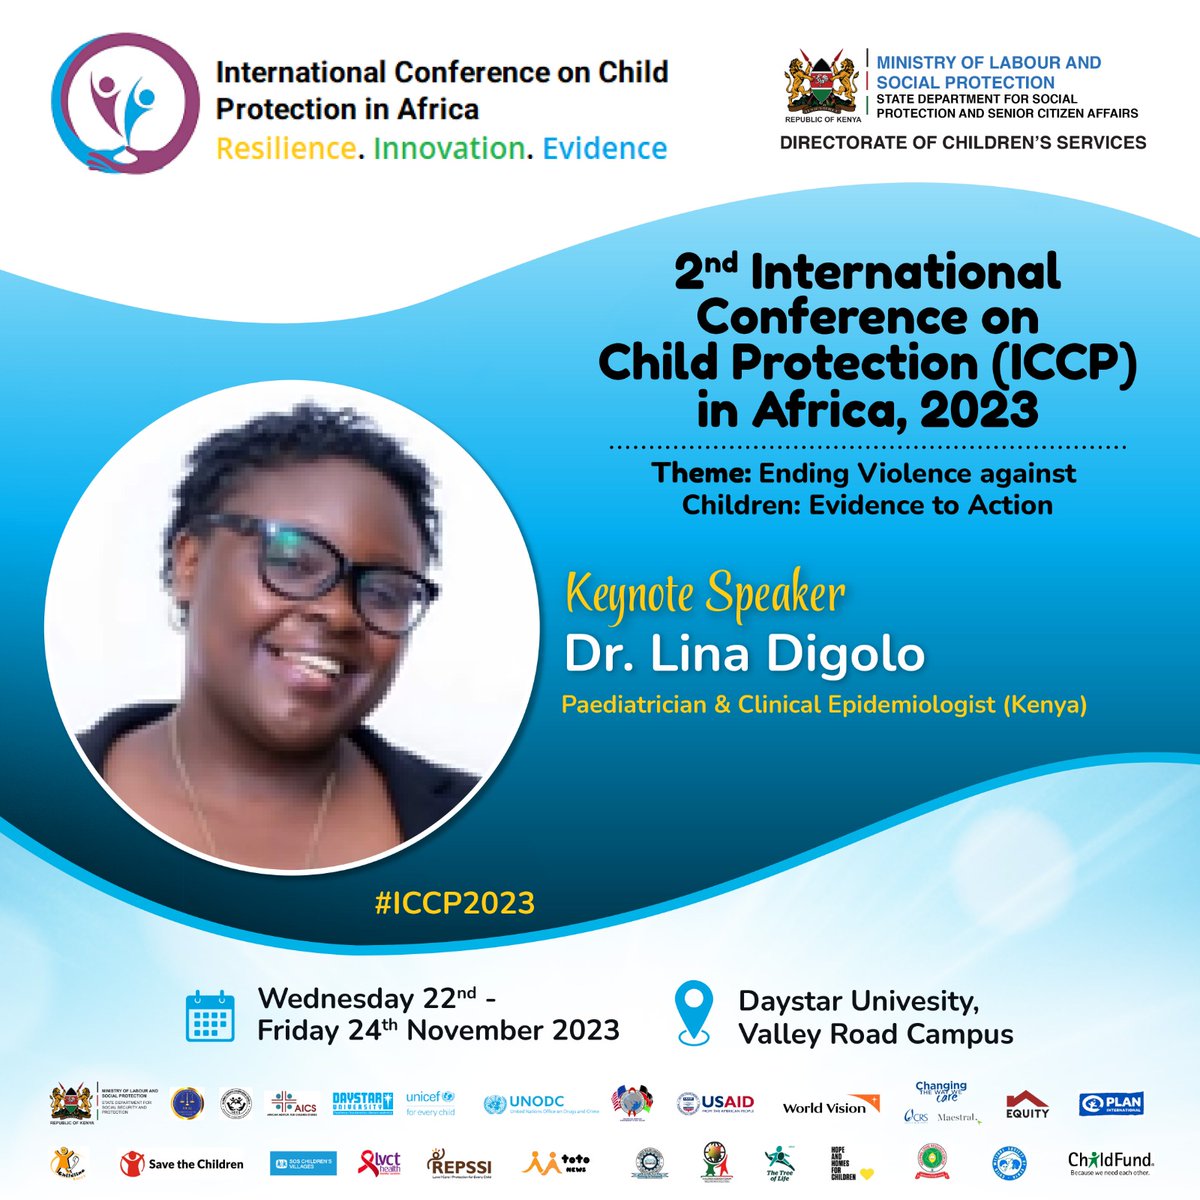 Save the date and get ready for informative sessions, hear from experts, survivors and advocates on the latest research and initiatives to combat #violenceagainstchildren 

#ICCP2023